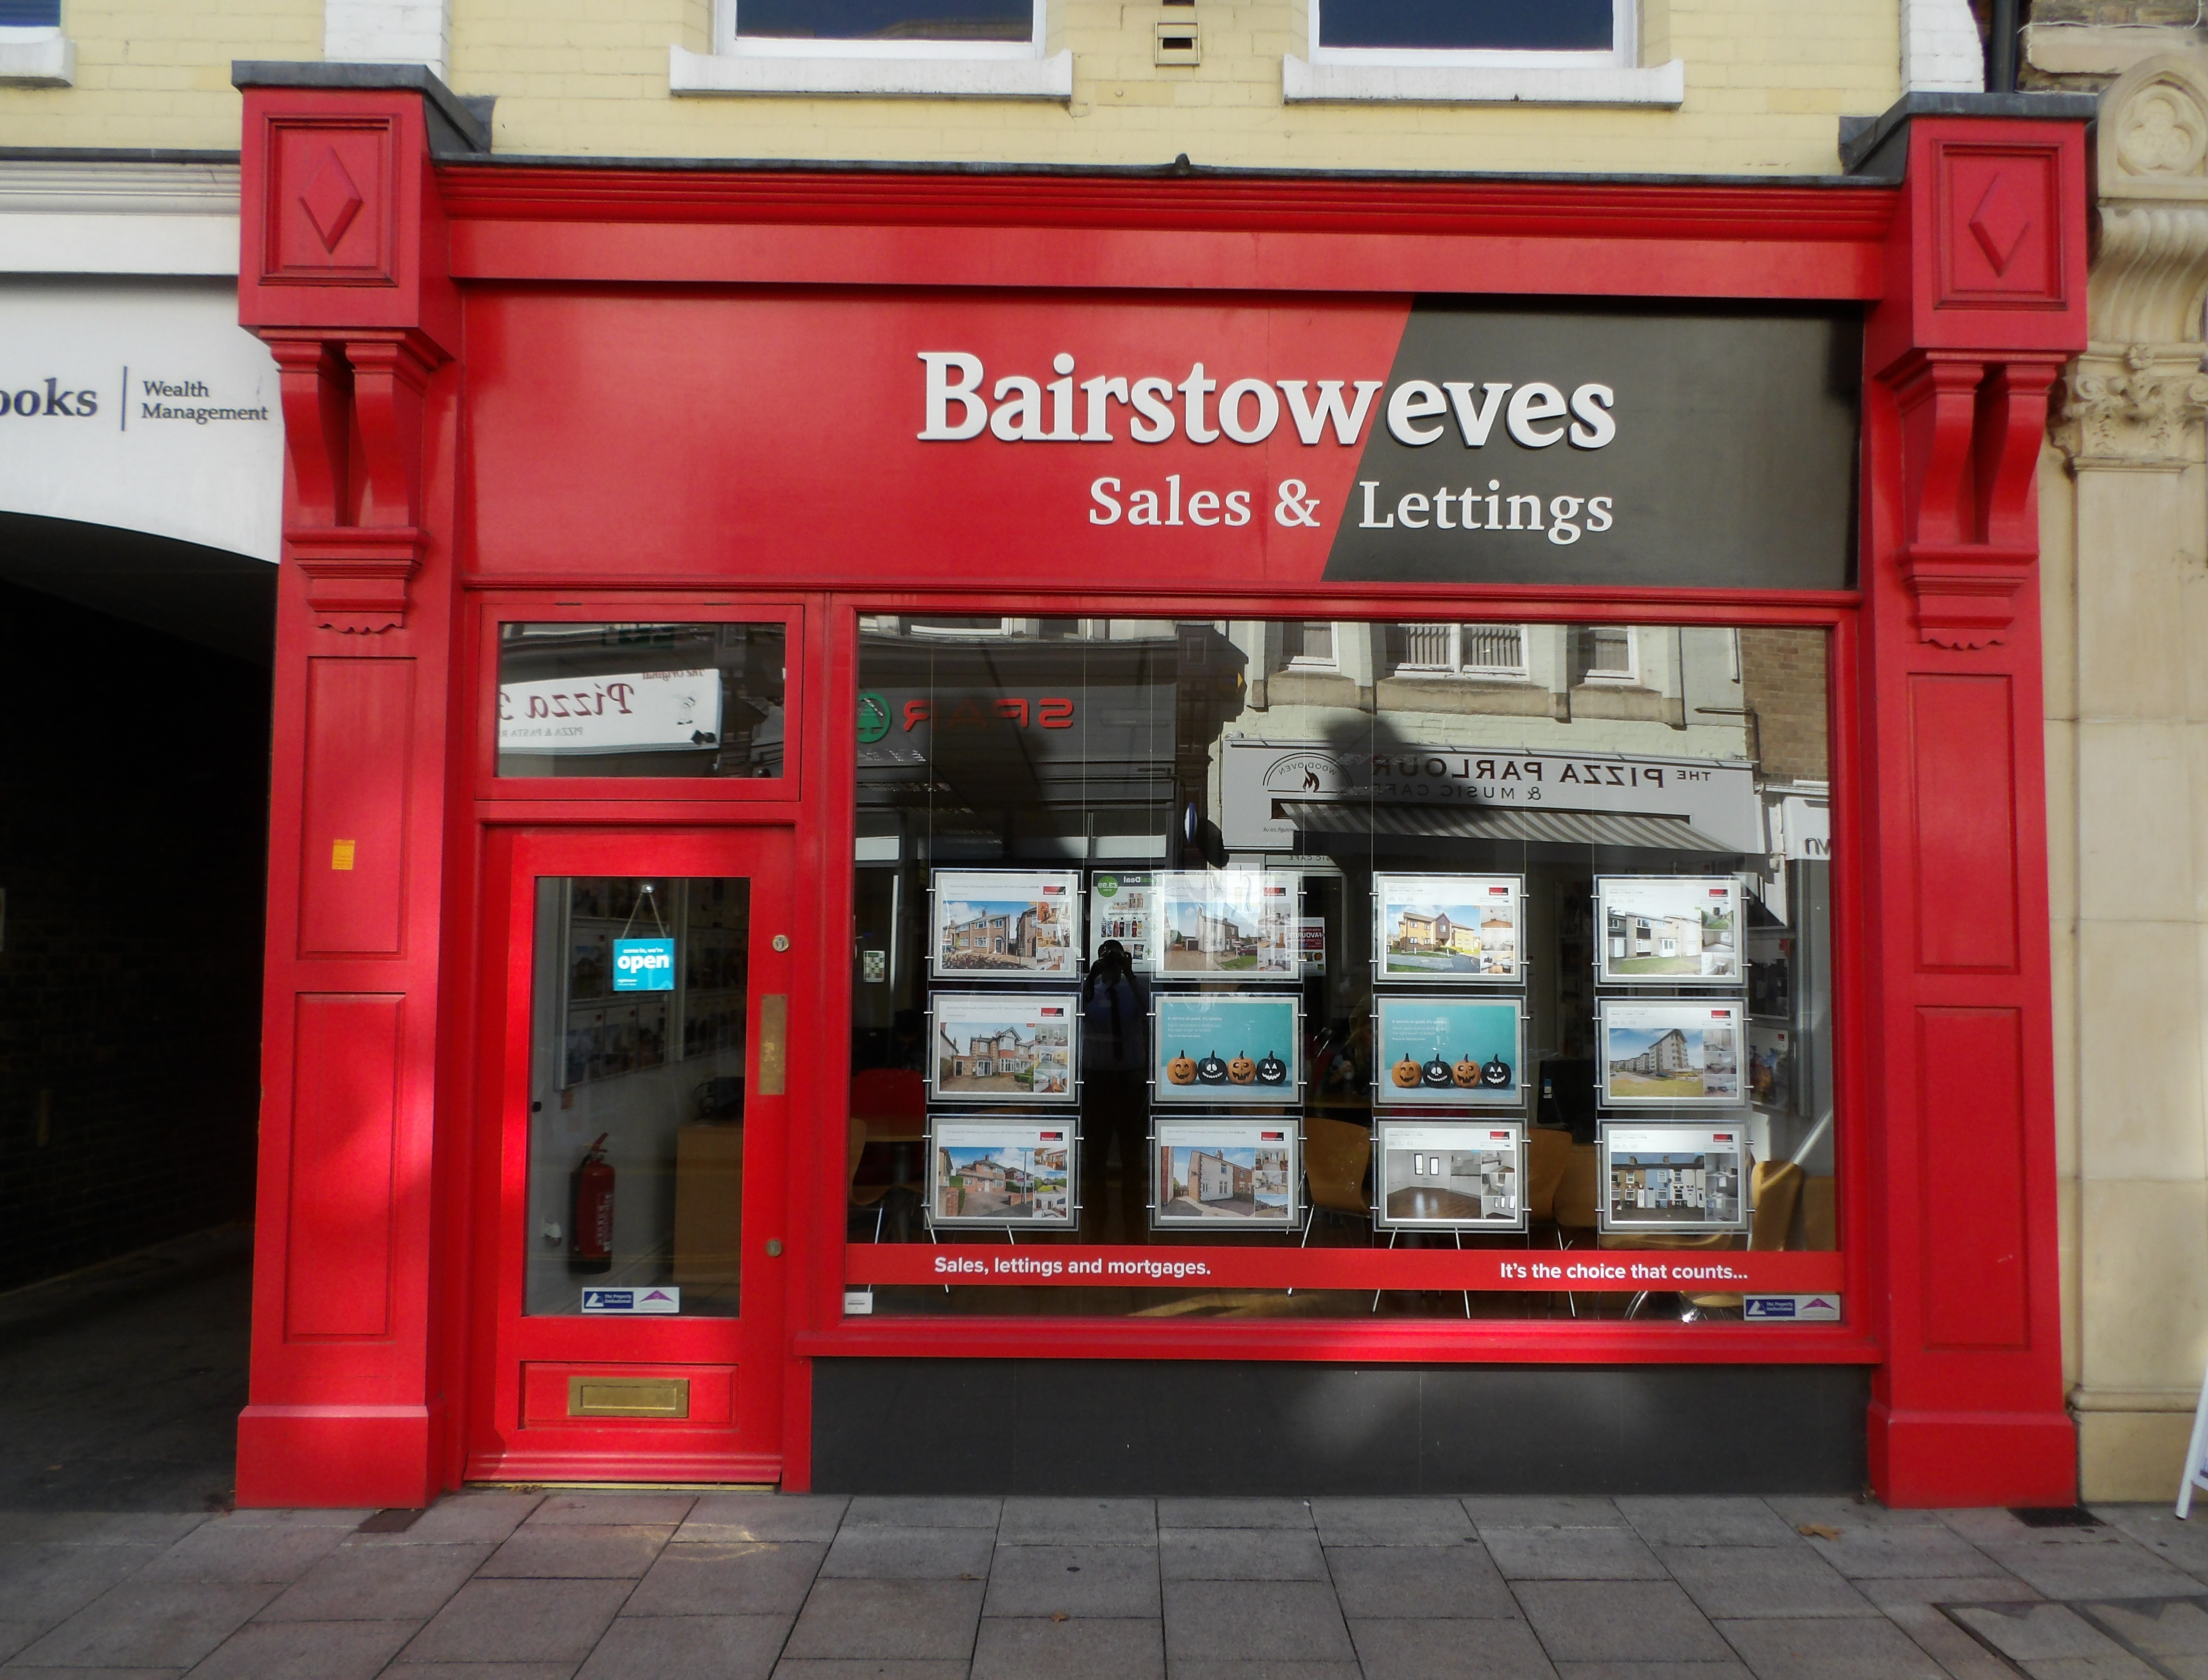 Bairstow Eves Sales and Letting Agents Peterborough Peterborough 01733 785024